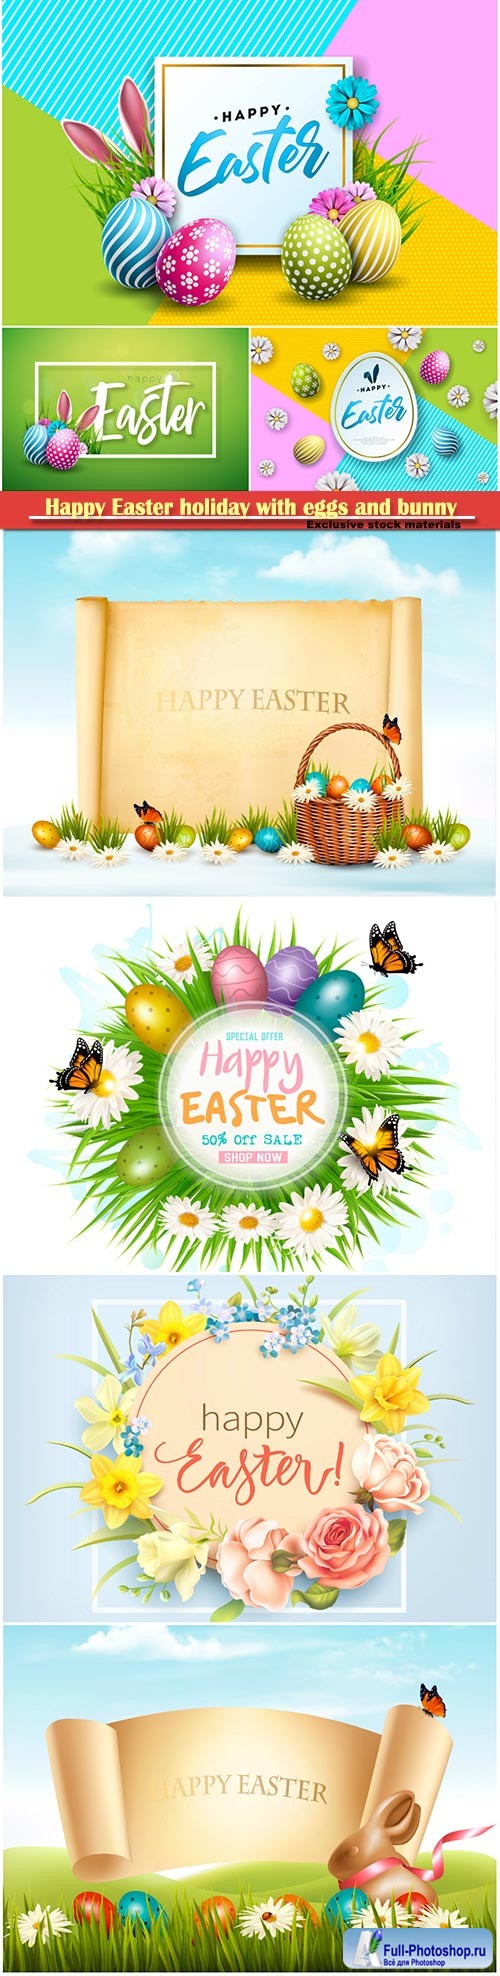 Happy Easter holiday with eggs and bunny, vector illustration # 20